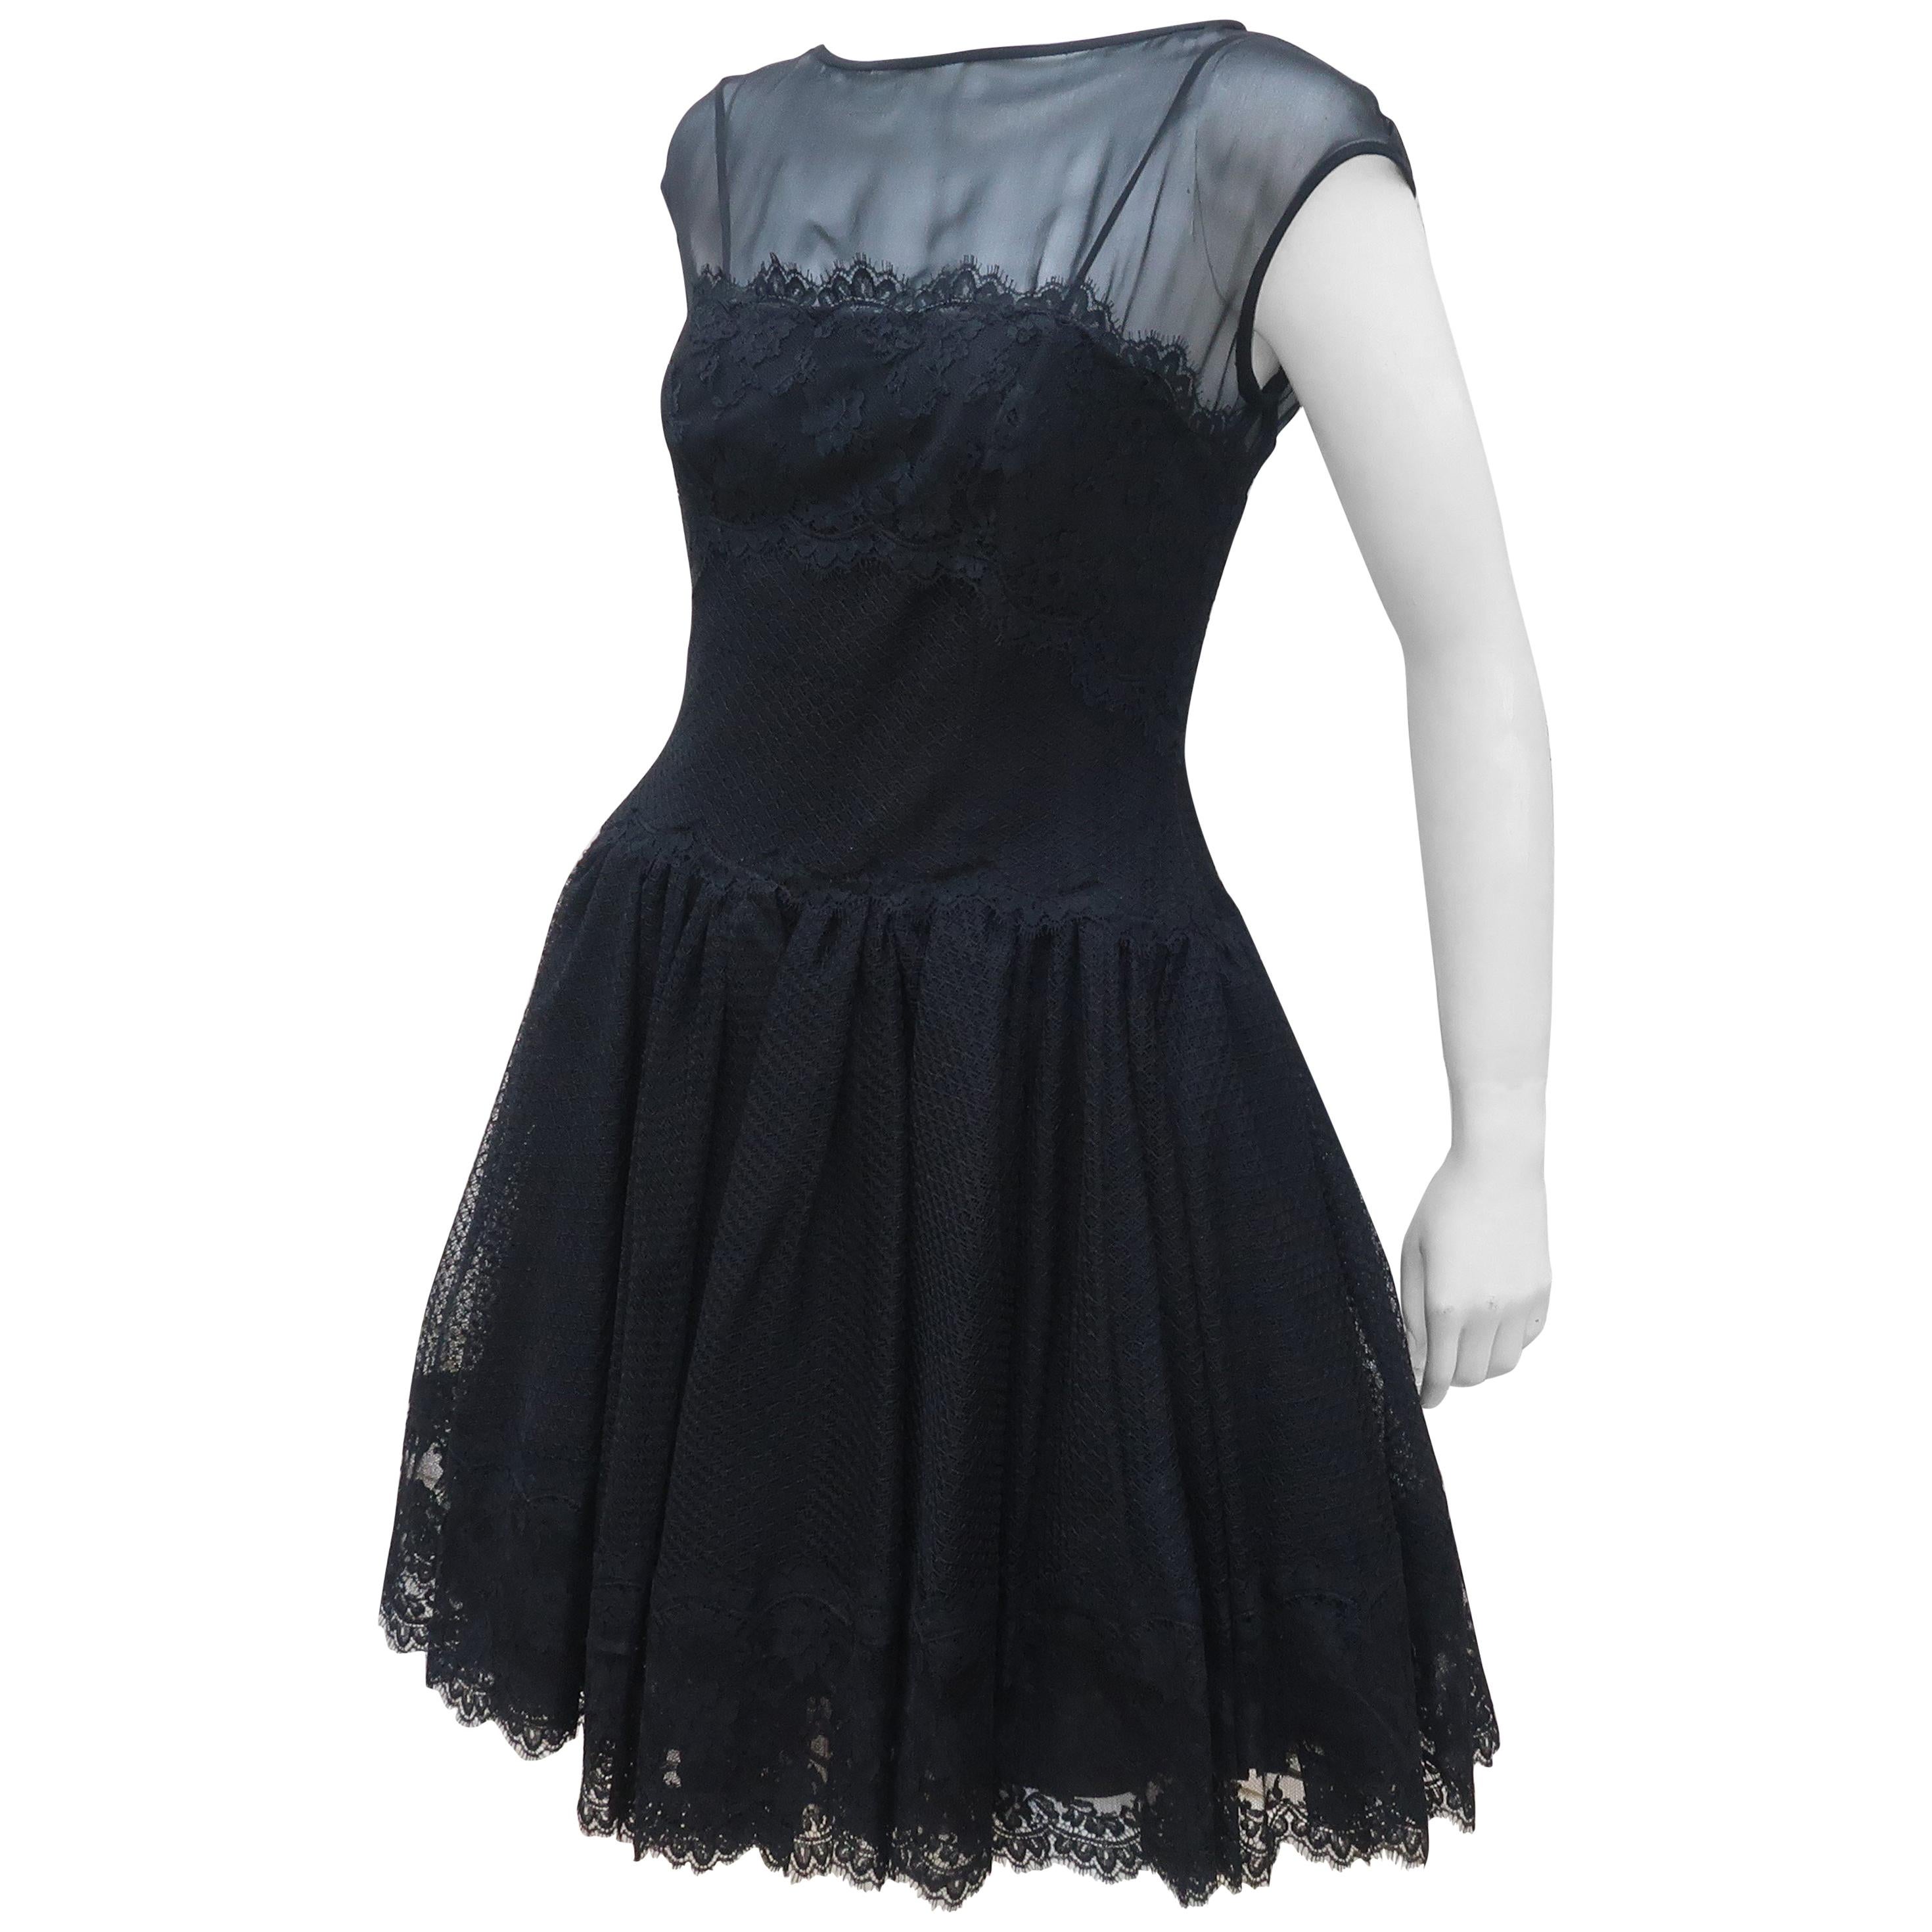 Stanley Platos Black Tulle and Lace Ballerina Cocktail Dress, 1980s  